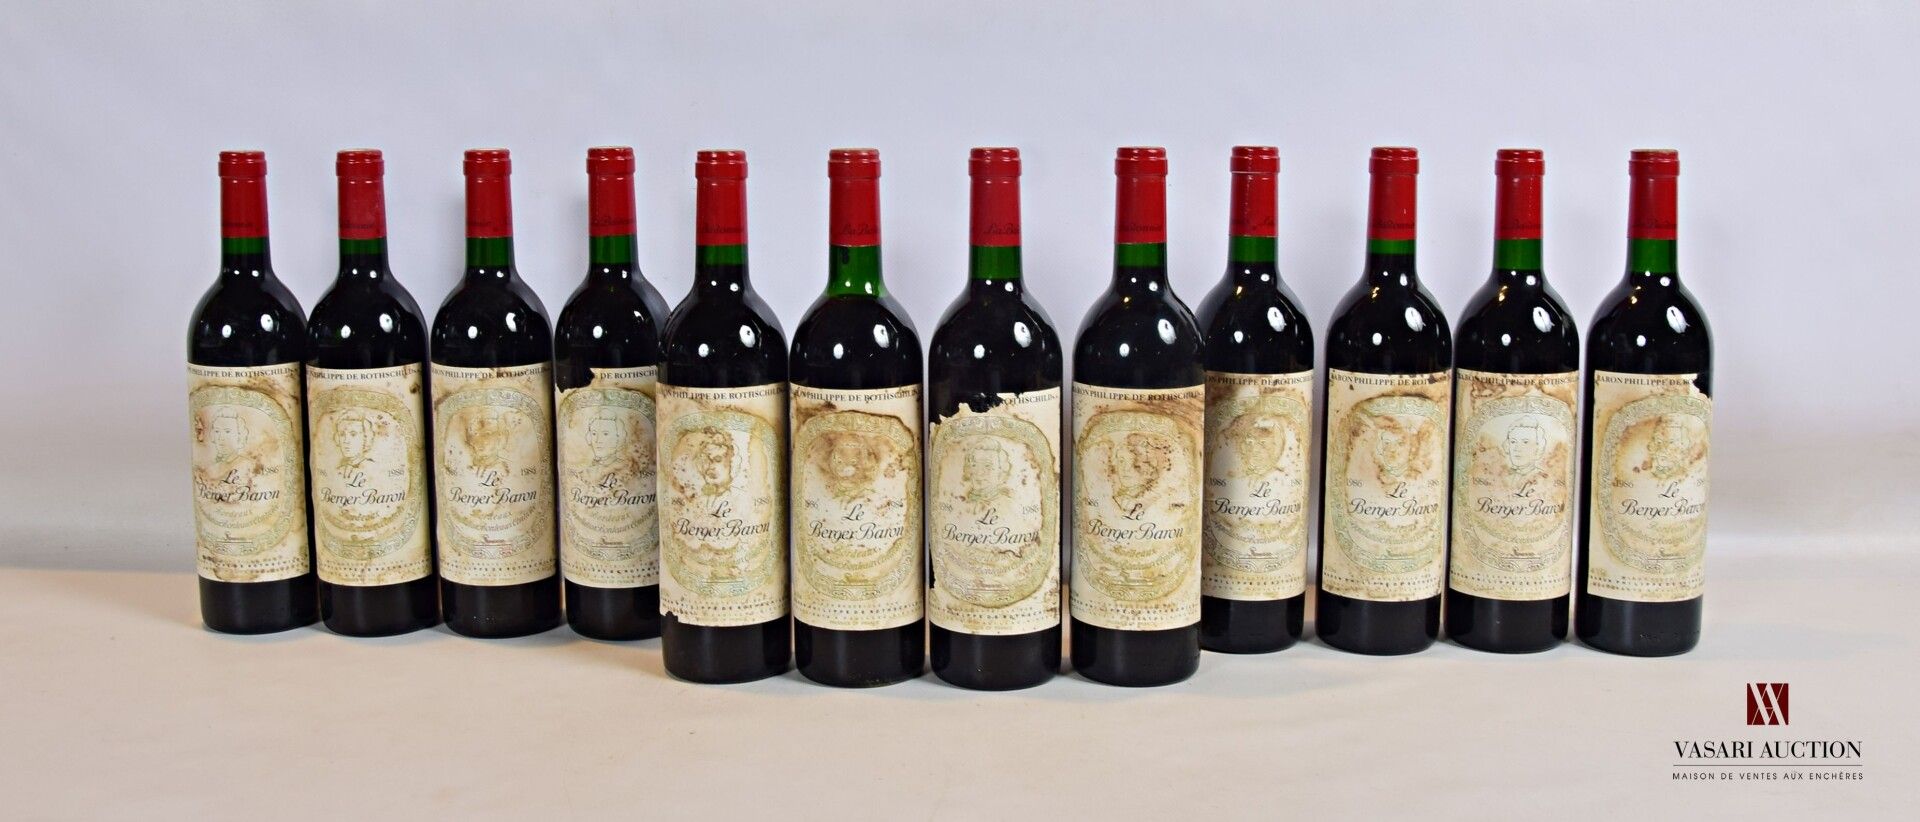 Null 12 bottles LE BERGER BARON Bordeaux mise neg. 1986

	And. More or less stai&hellip;